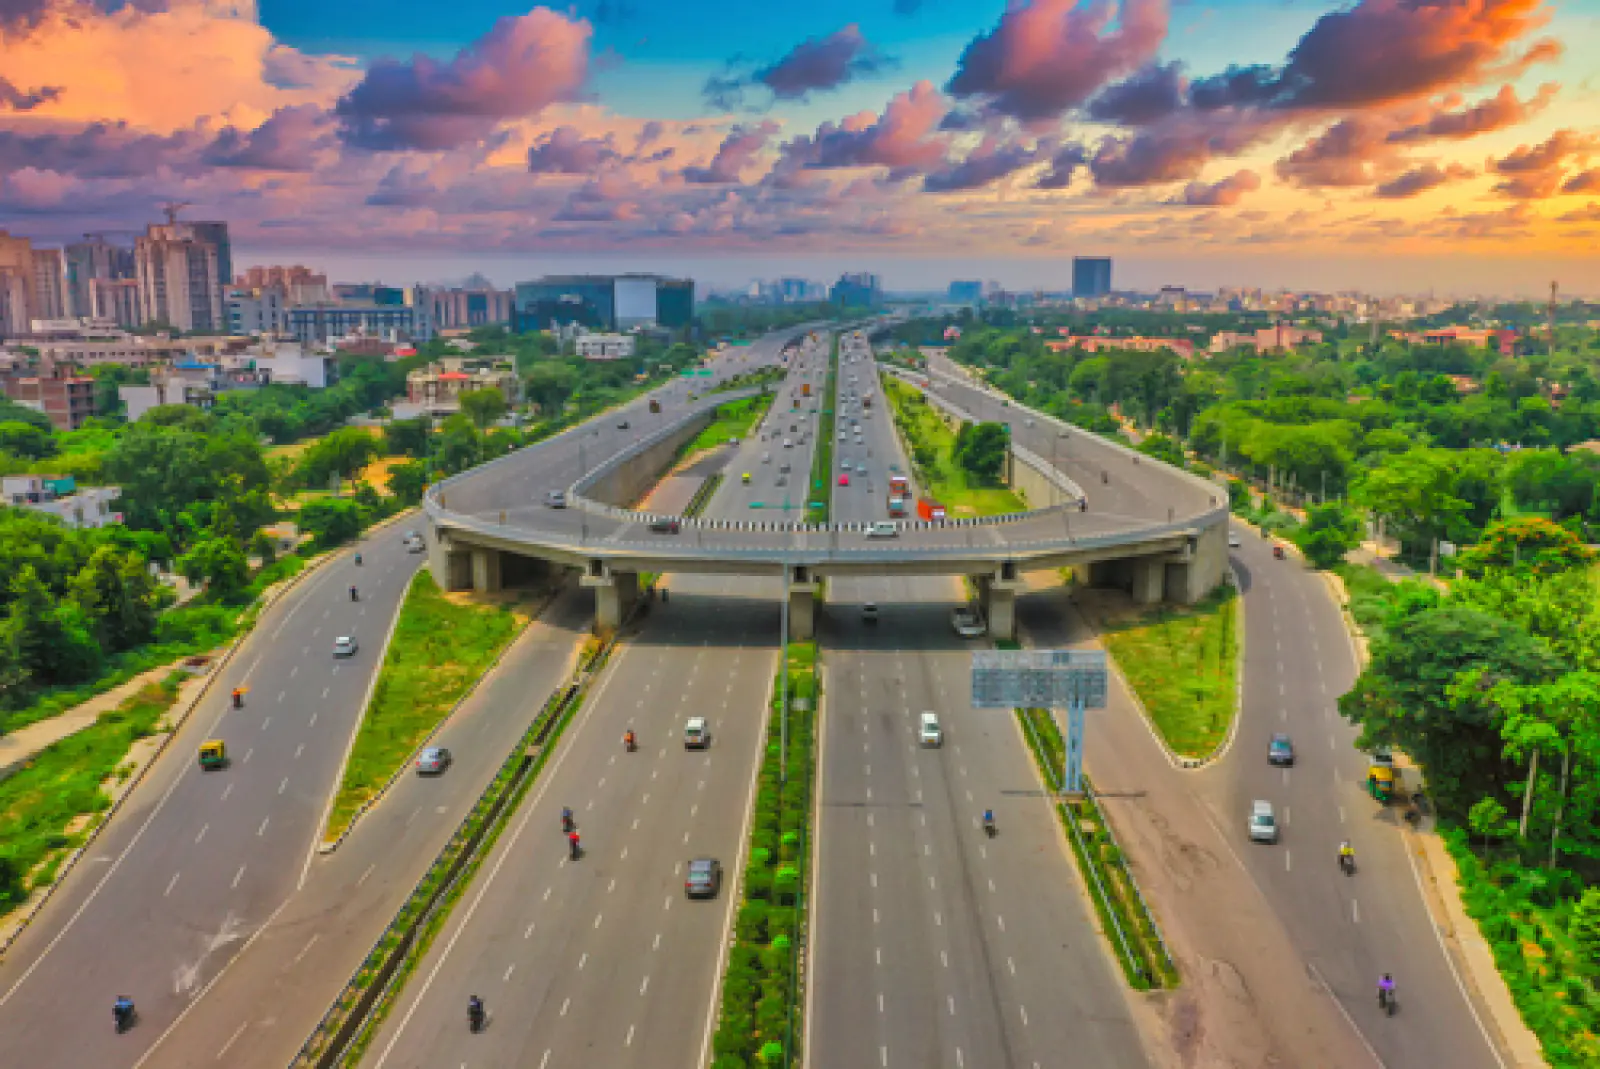 Four expressways to connect Mumbai to Kolkata soon! Awaiting final approval of the proposal